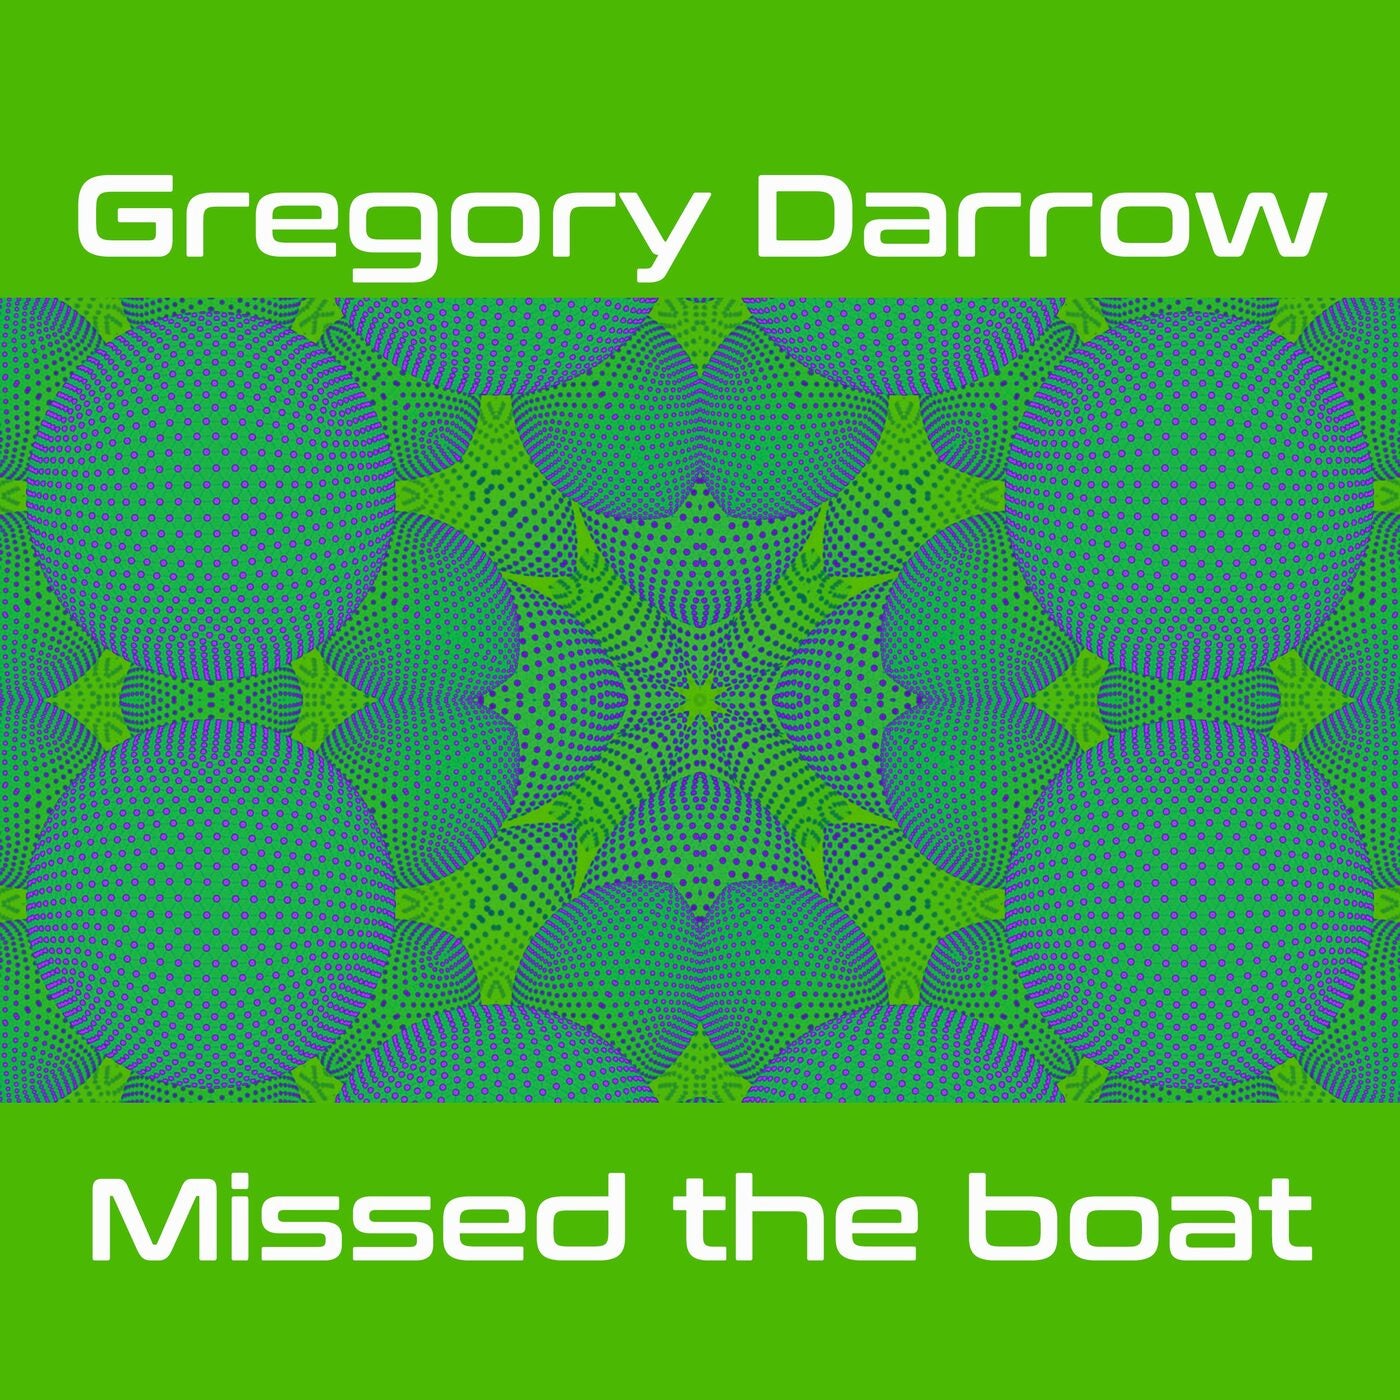 Missed the boat by Gregory Darrow on Beatsource